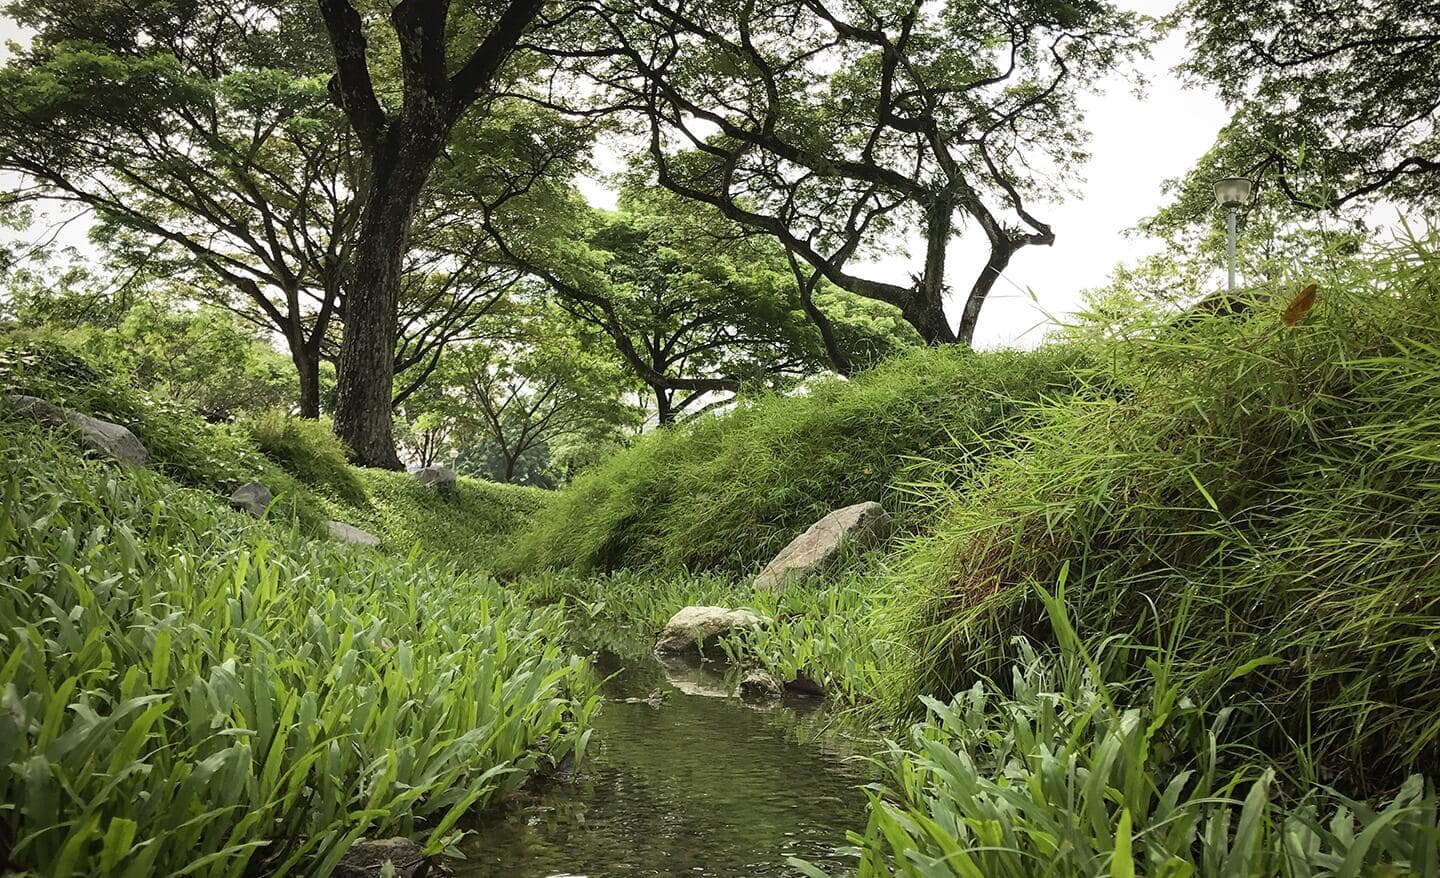 Water flows between two grassy banks